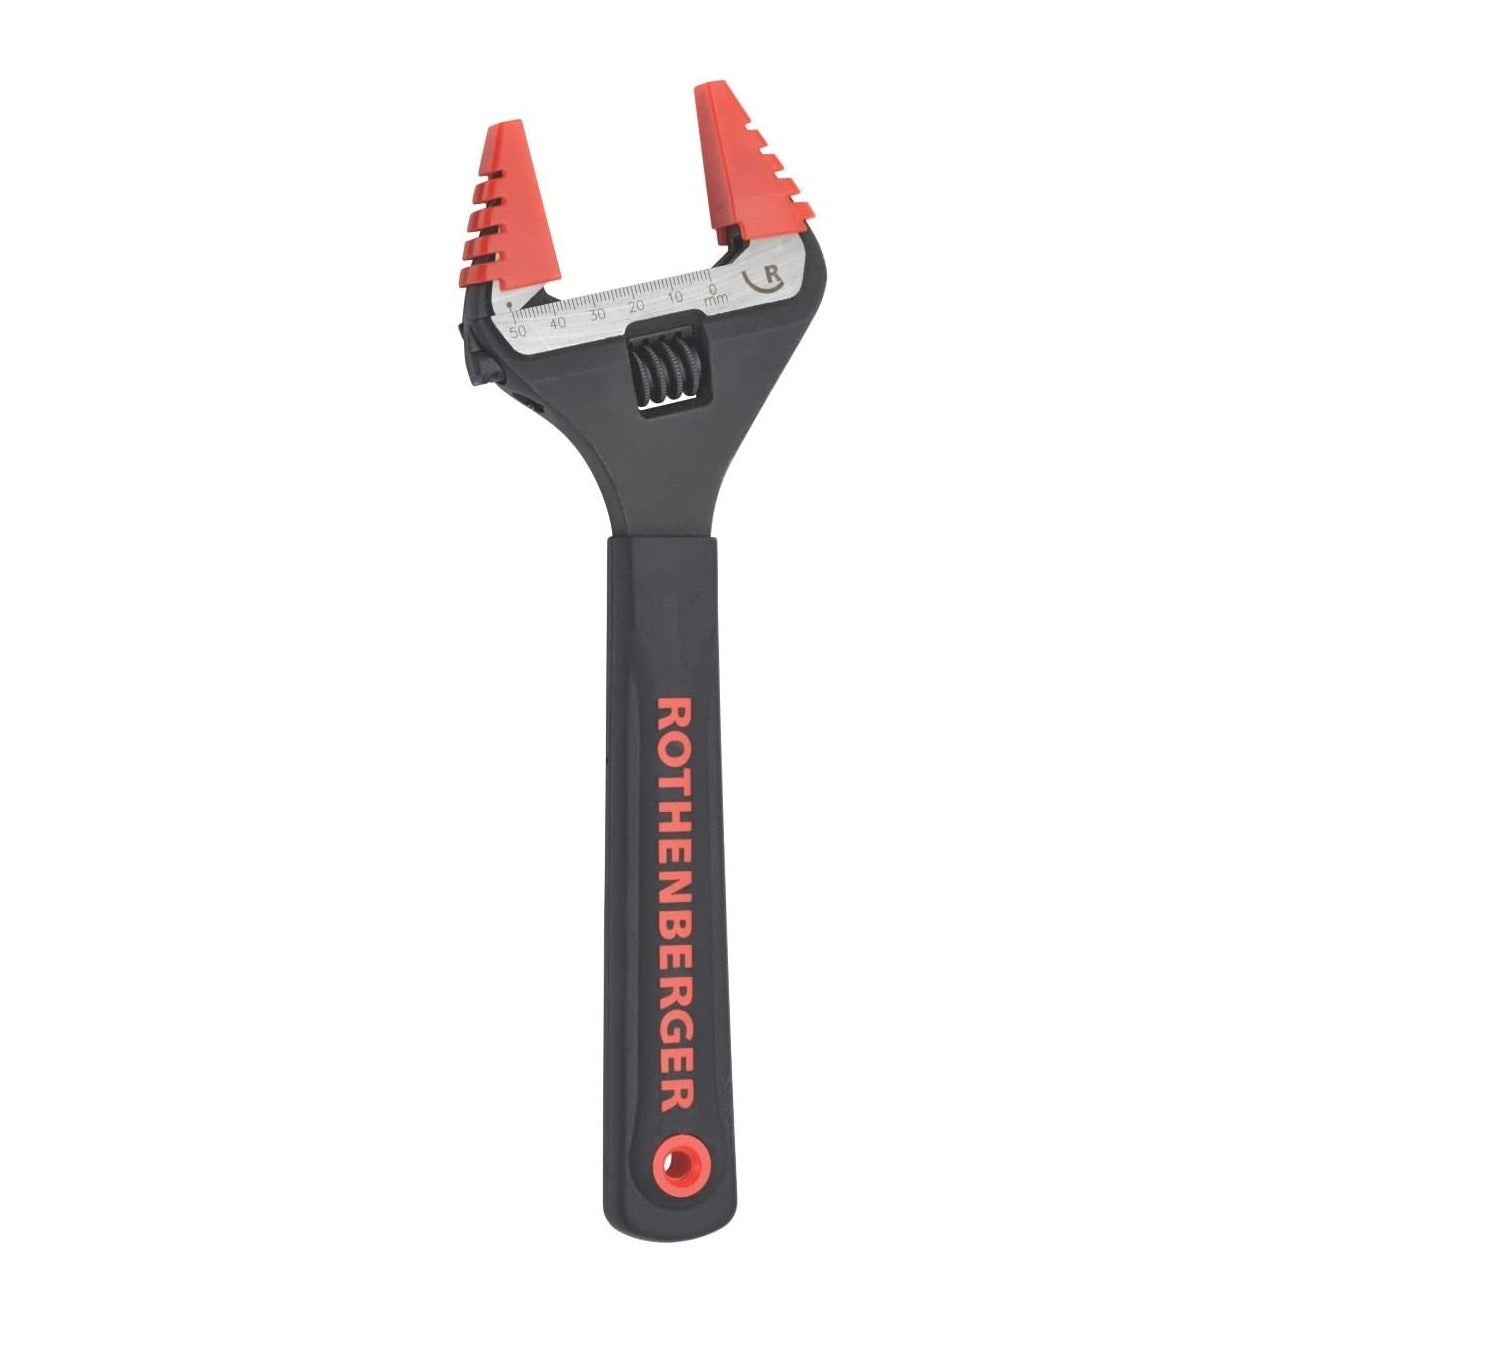 Rothenberger 18047 extra wide jaw wrench set, 6", 8" & 10"